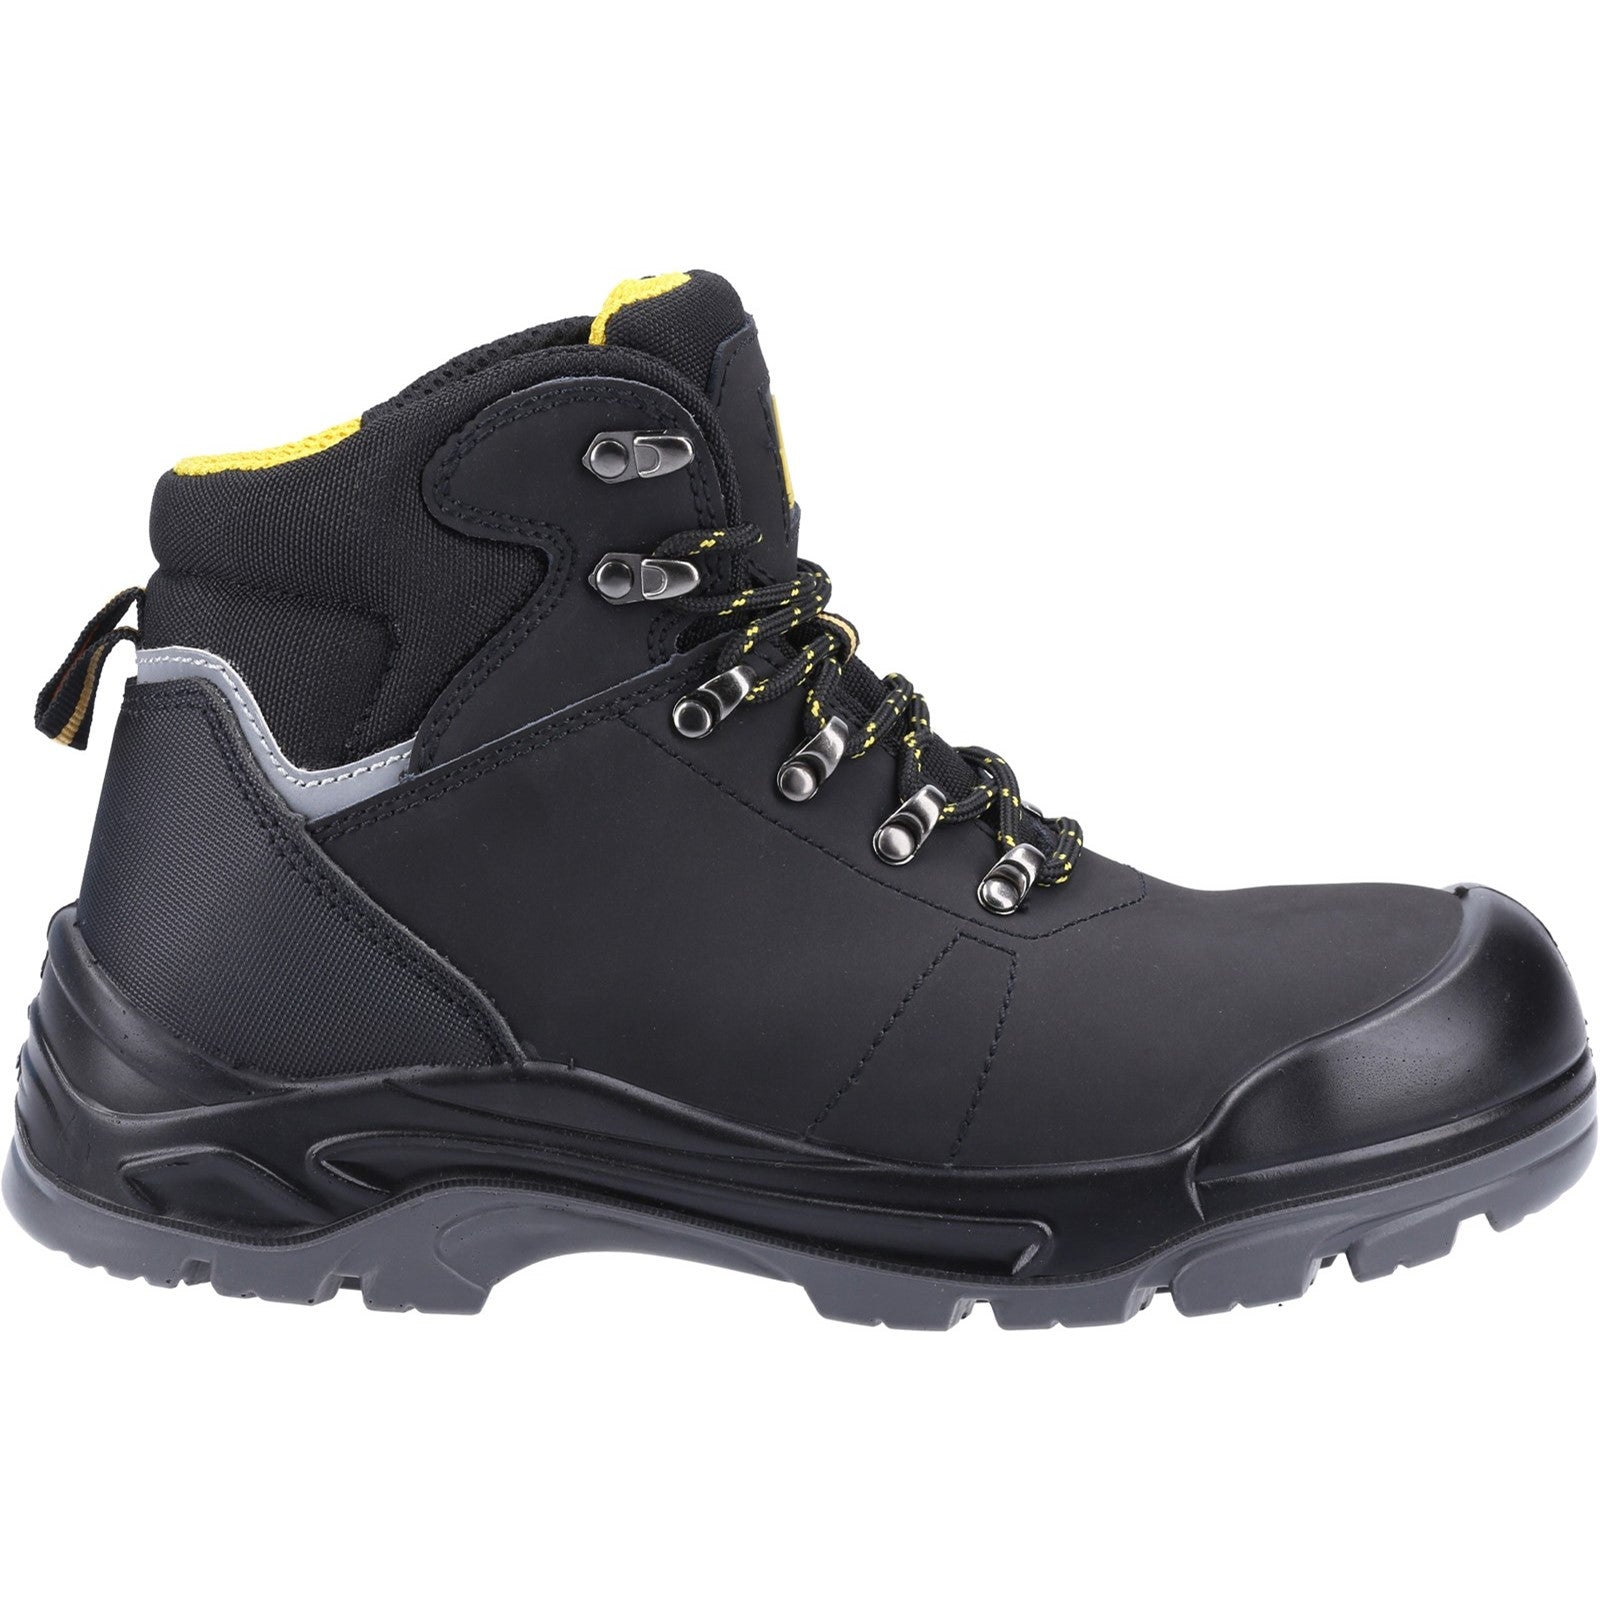 Amblers AS252 Lightweight Water Resistant Leather Safety Boot